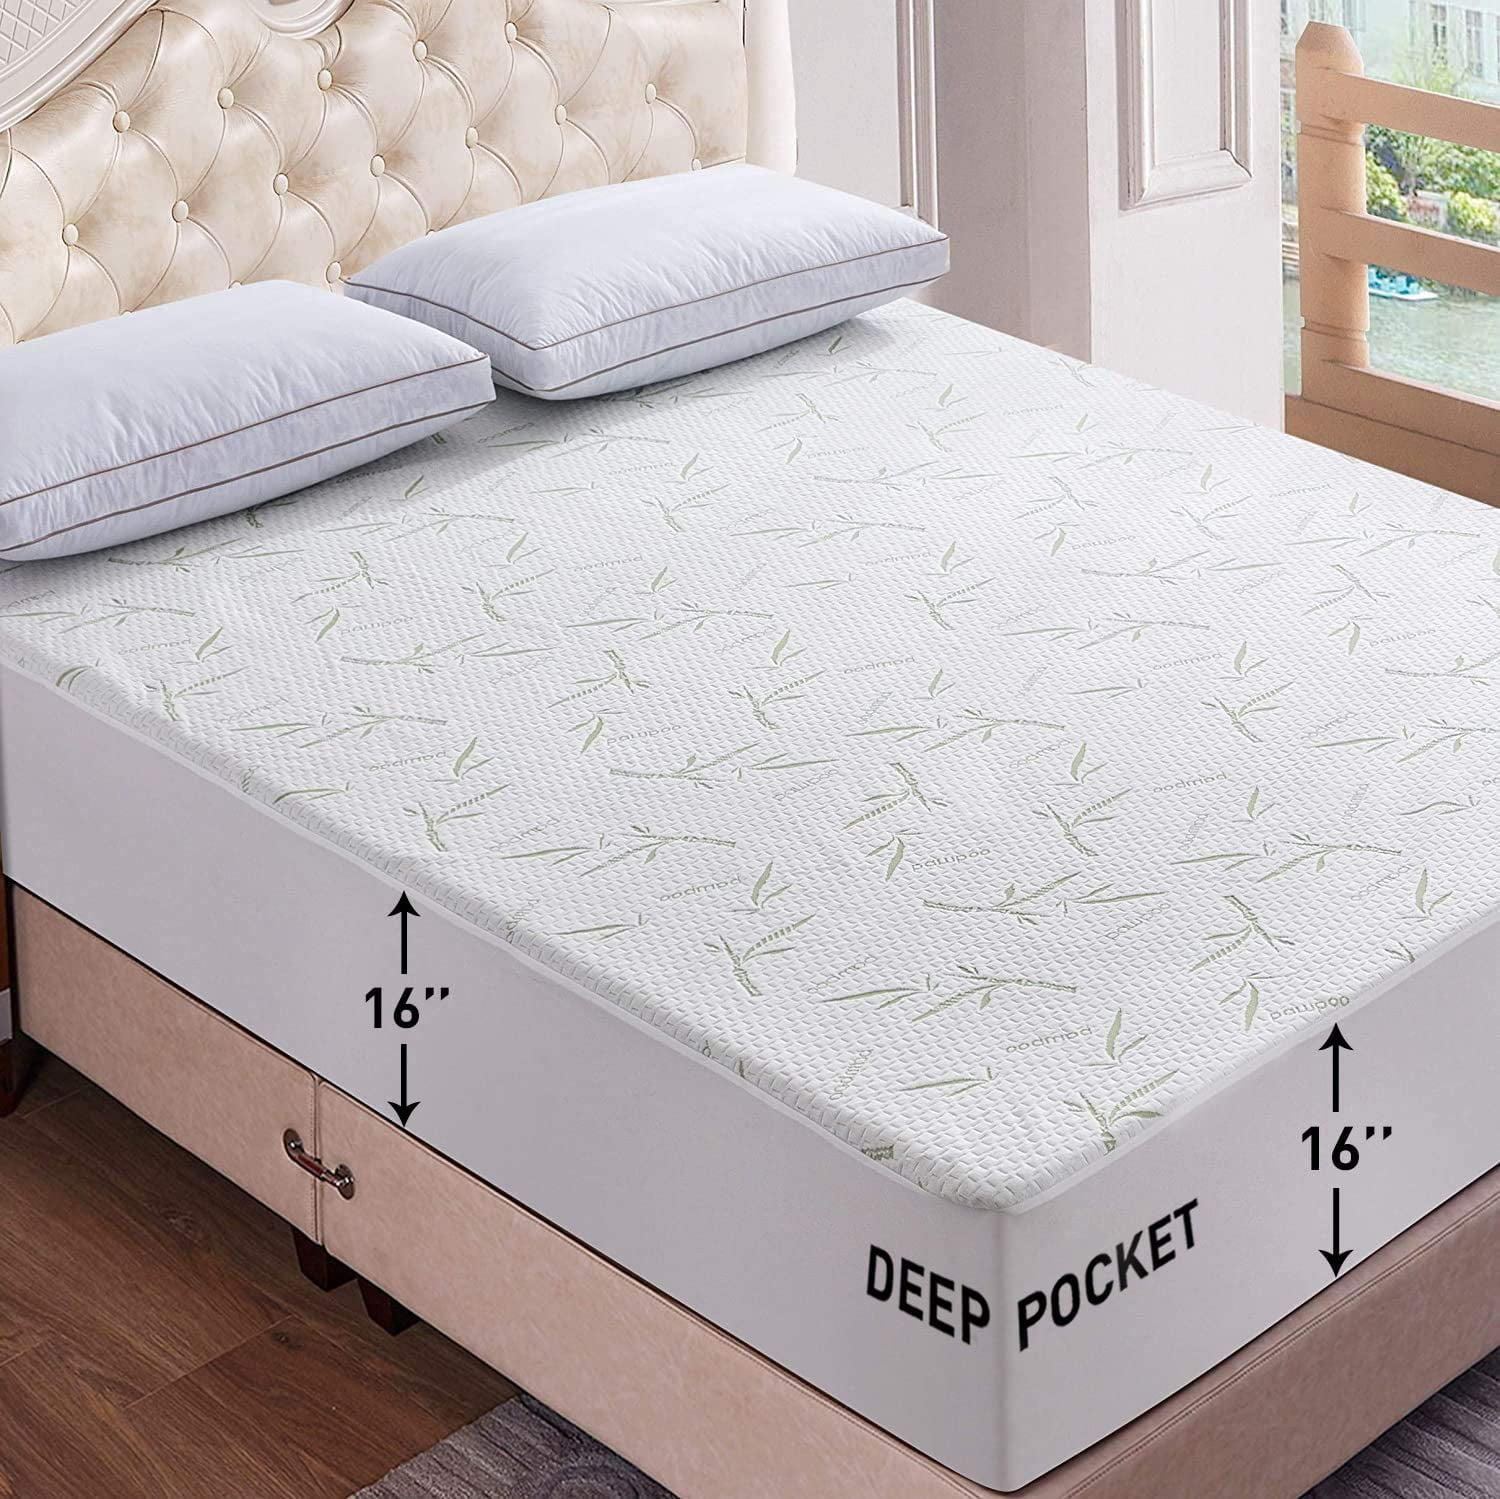 Details about   Bamboo Mattress Protector Waterproof Cooling Matress Quiet Cover Soft Quilted 